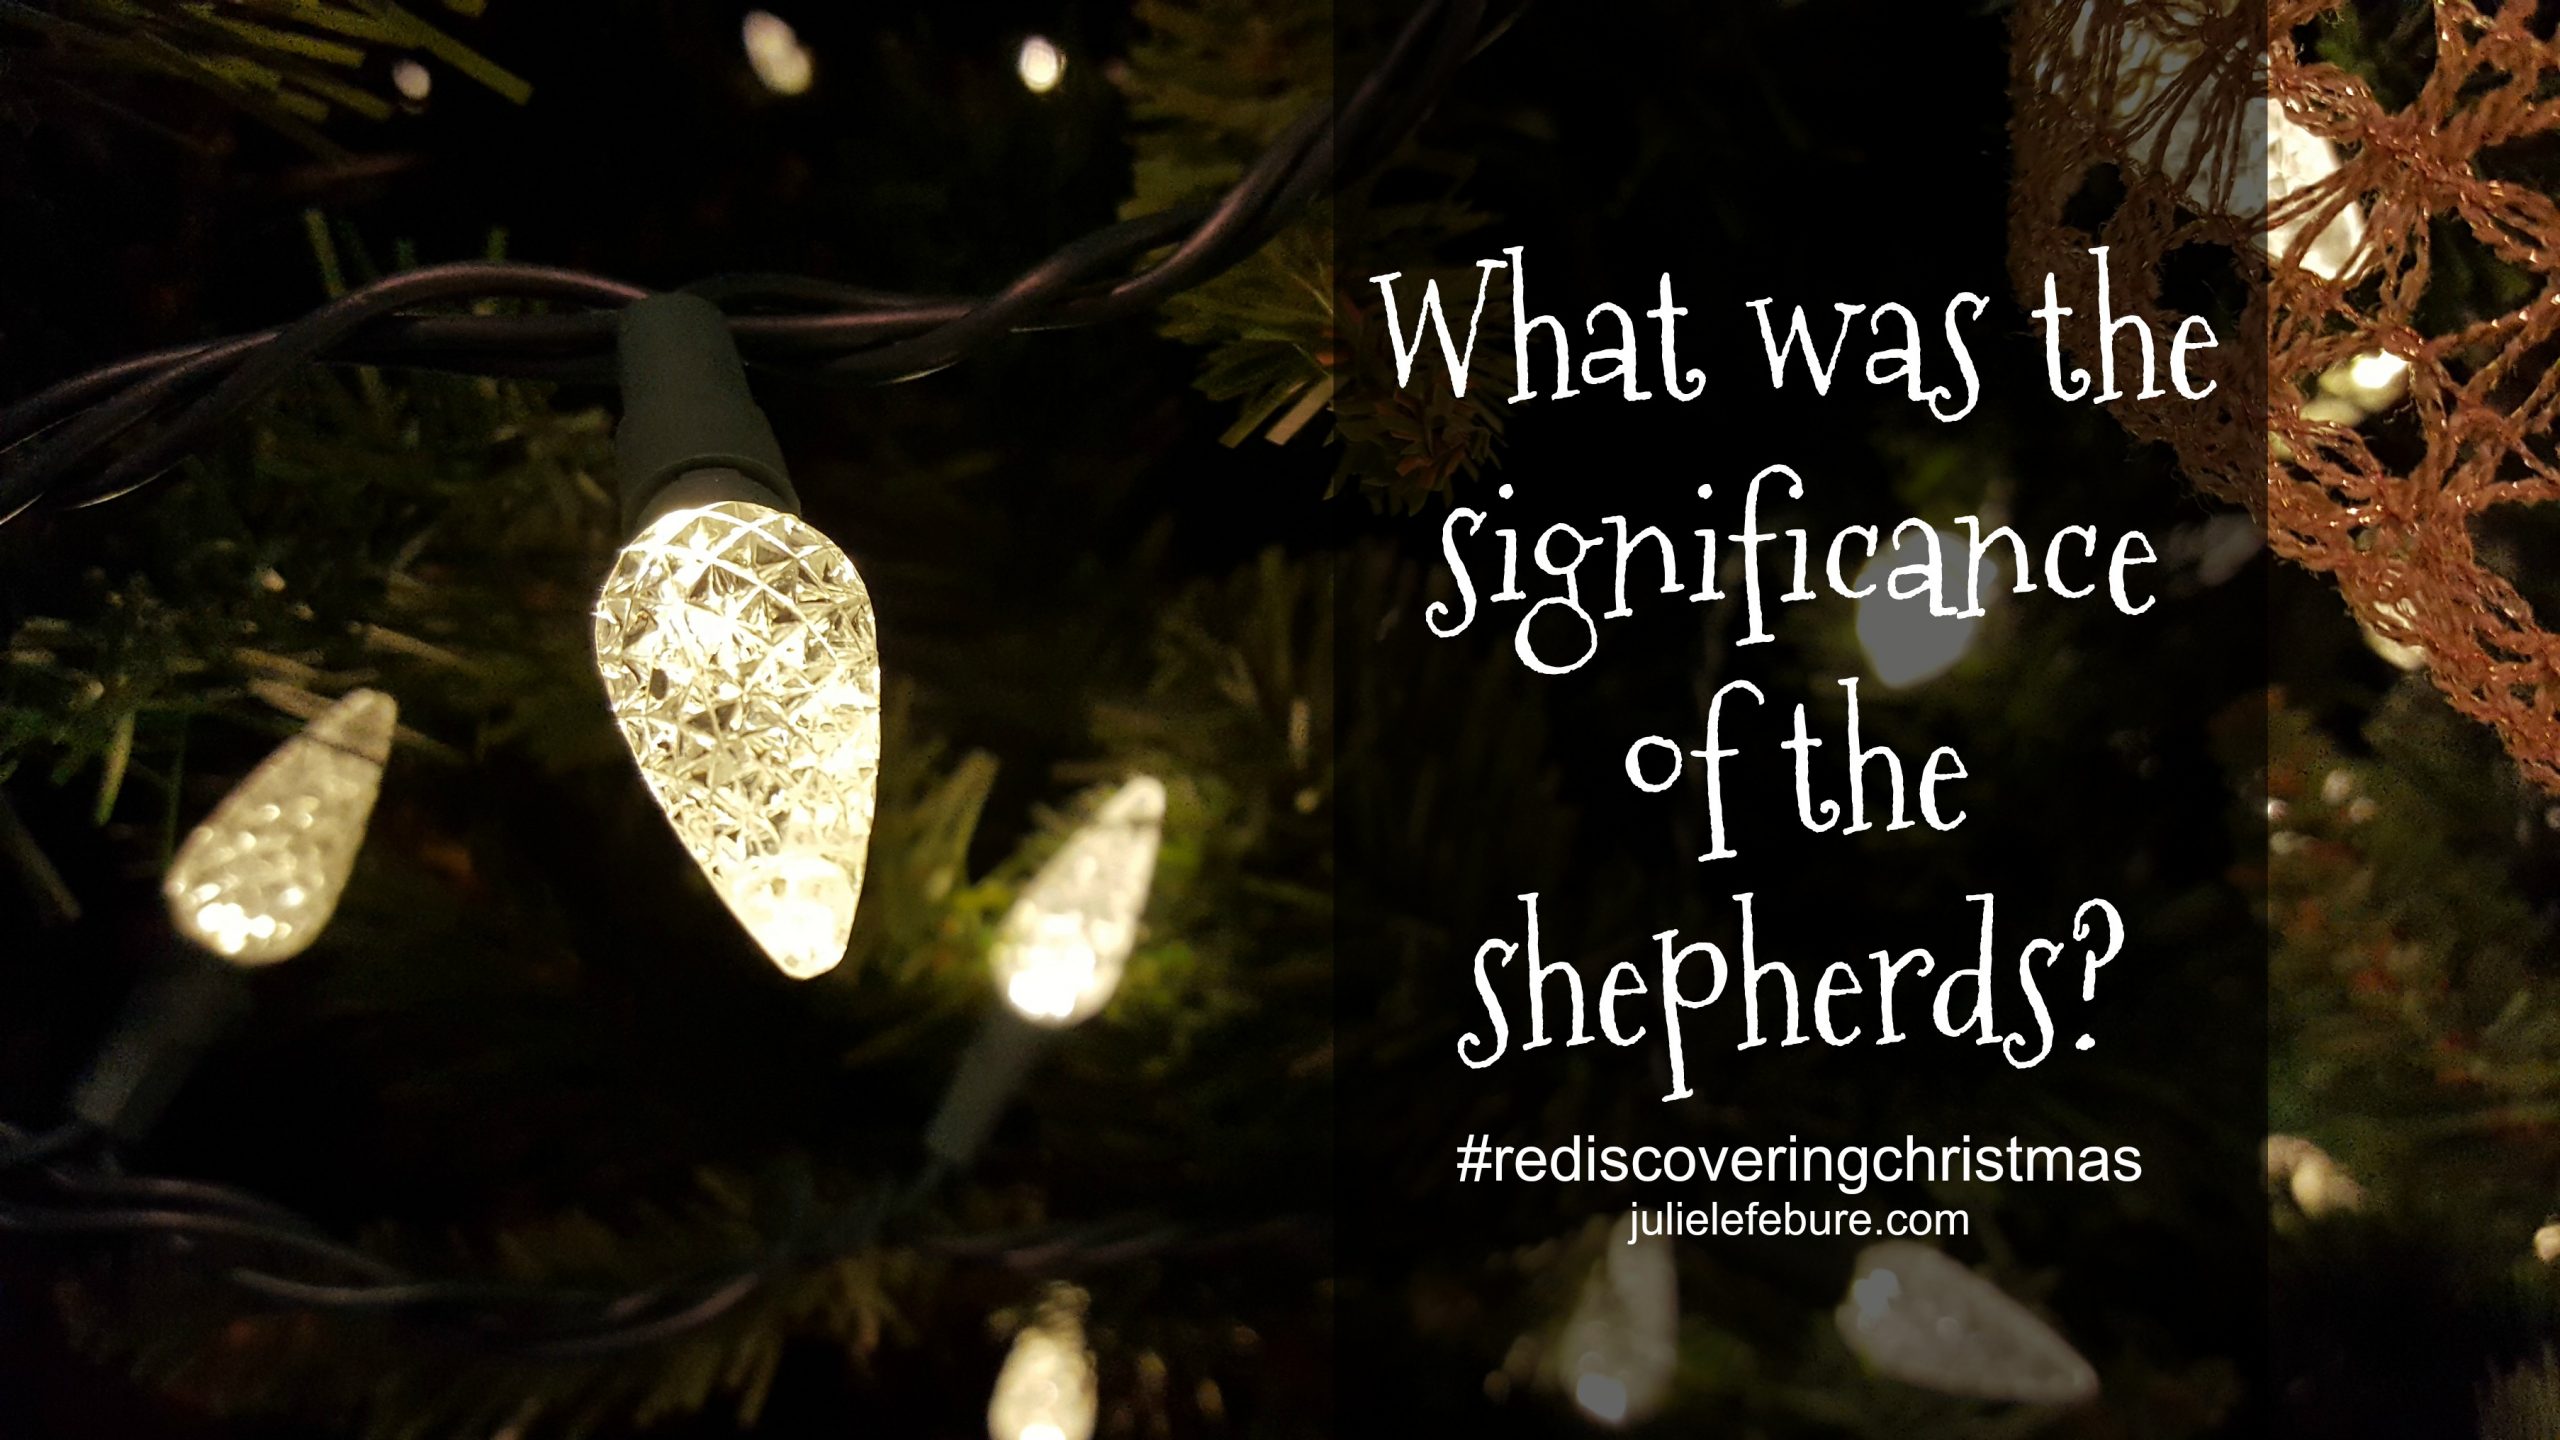 Rediscovering Christmas – The Significance Of The Shepherds